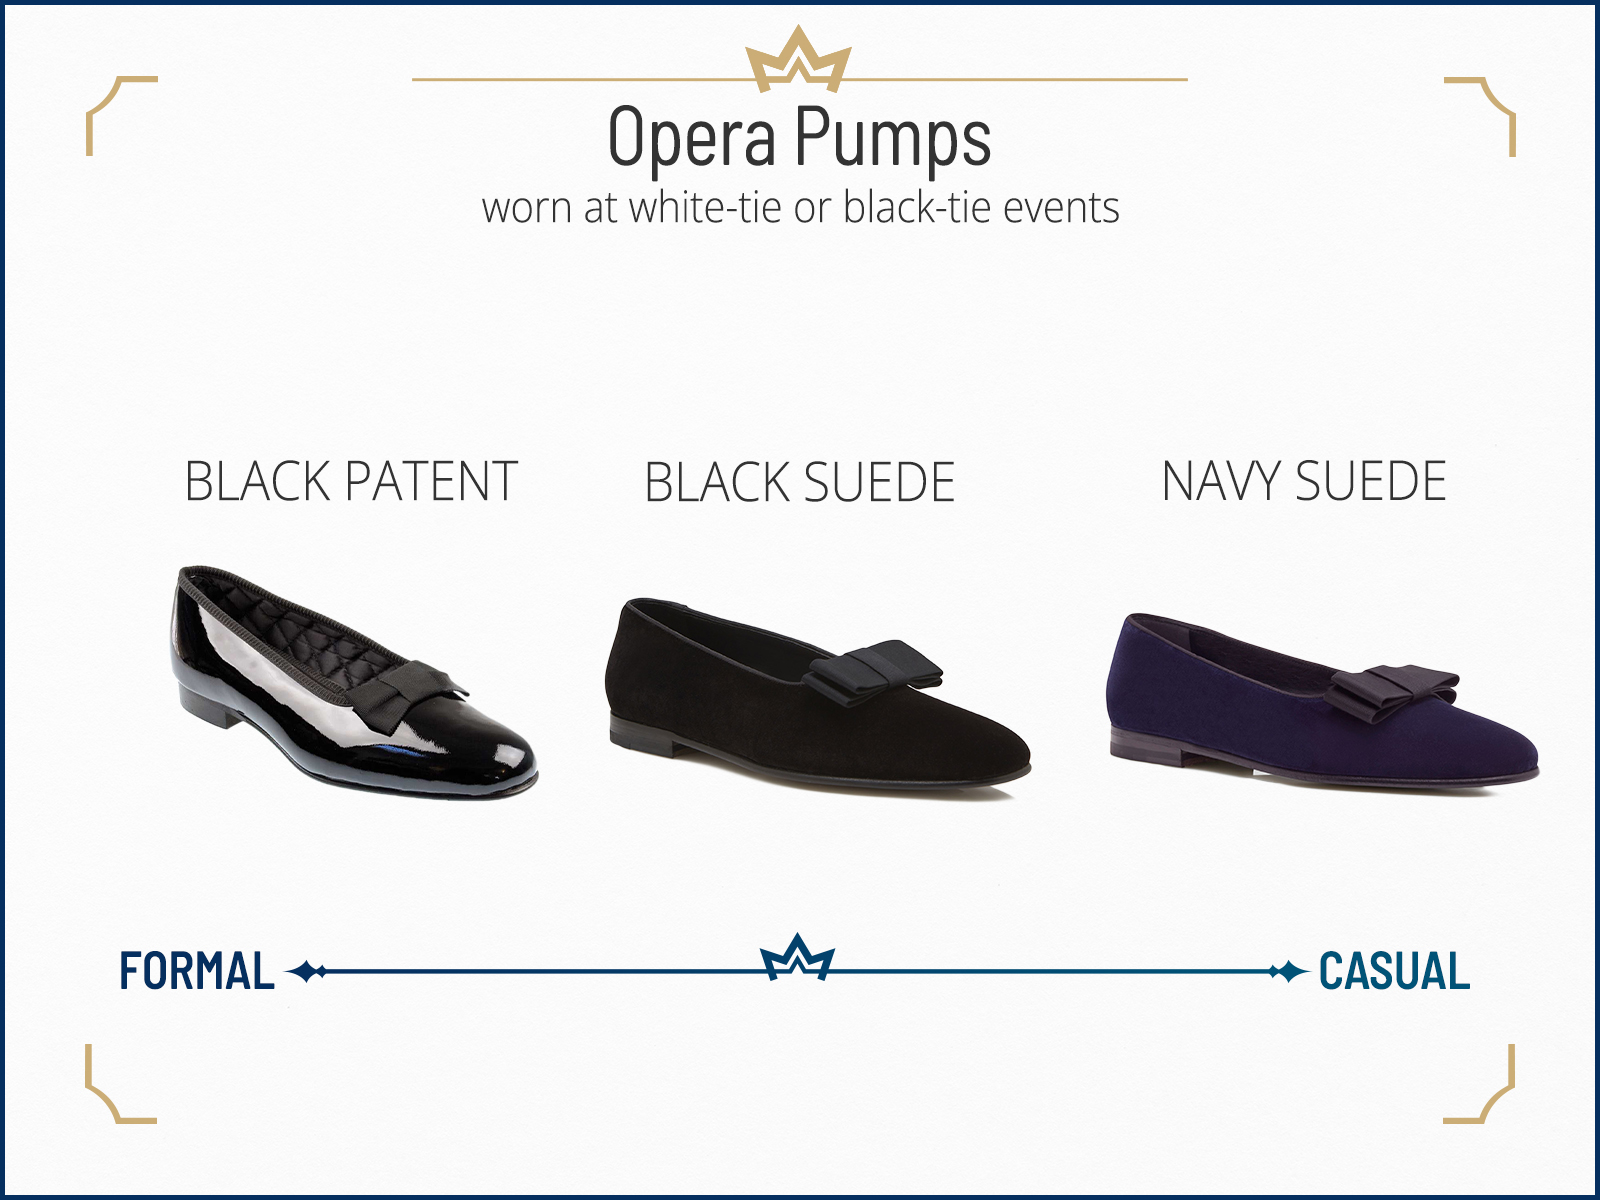 Different opera pumps types on the formality spectrum